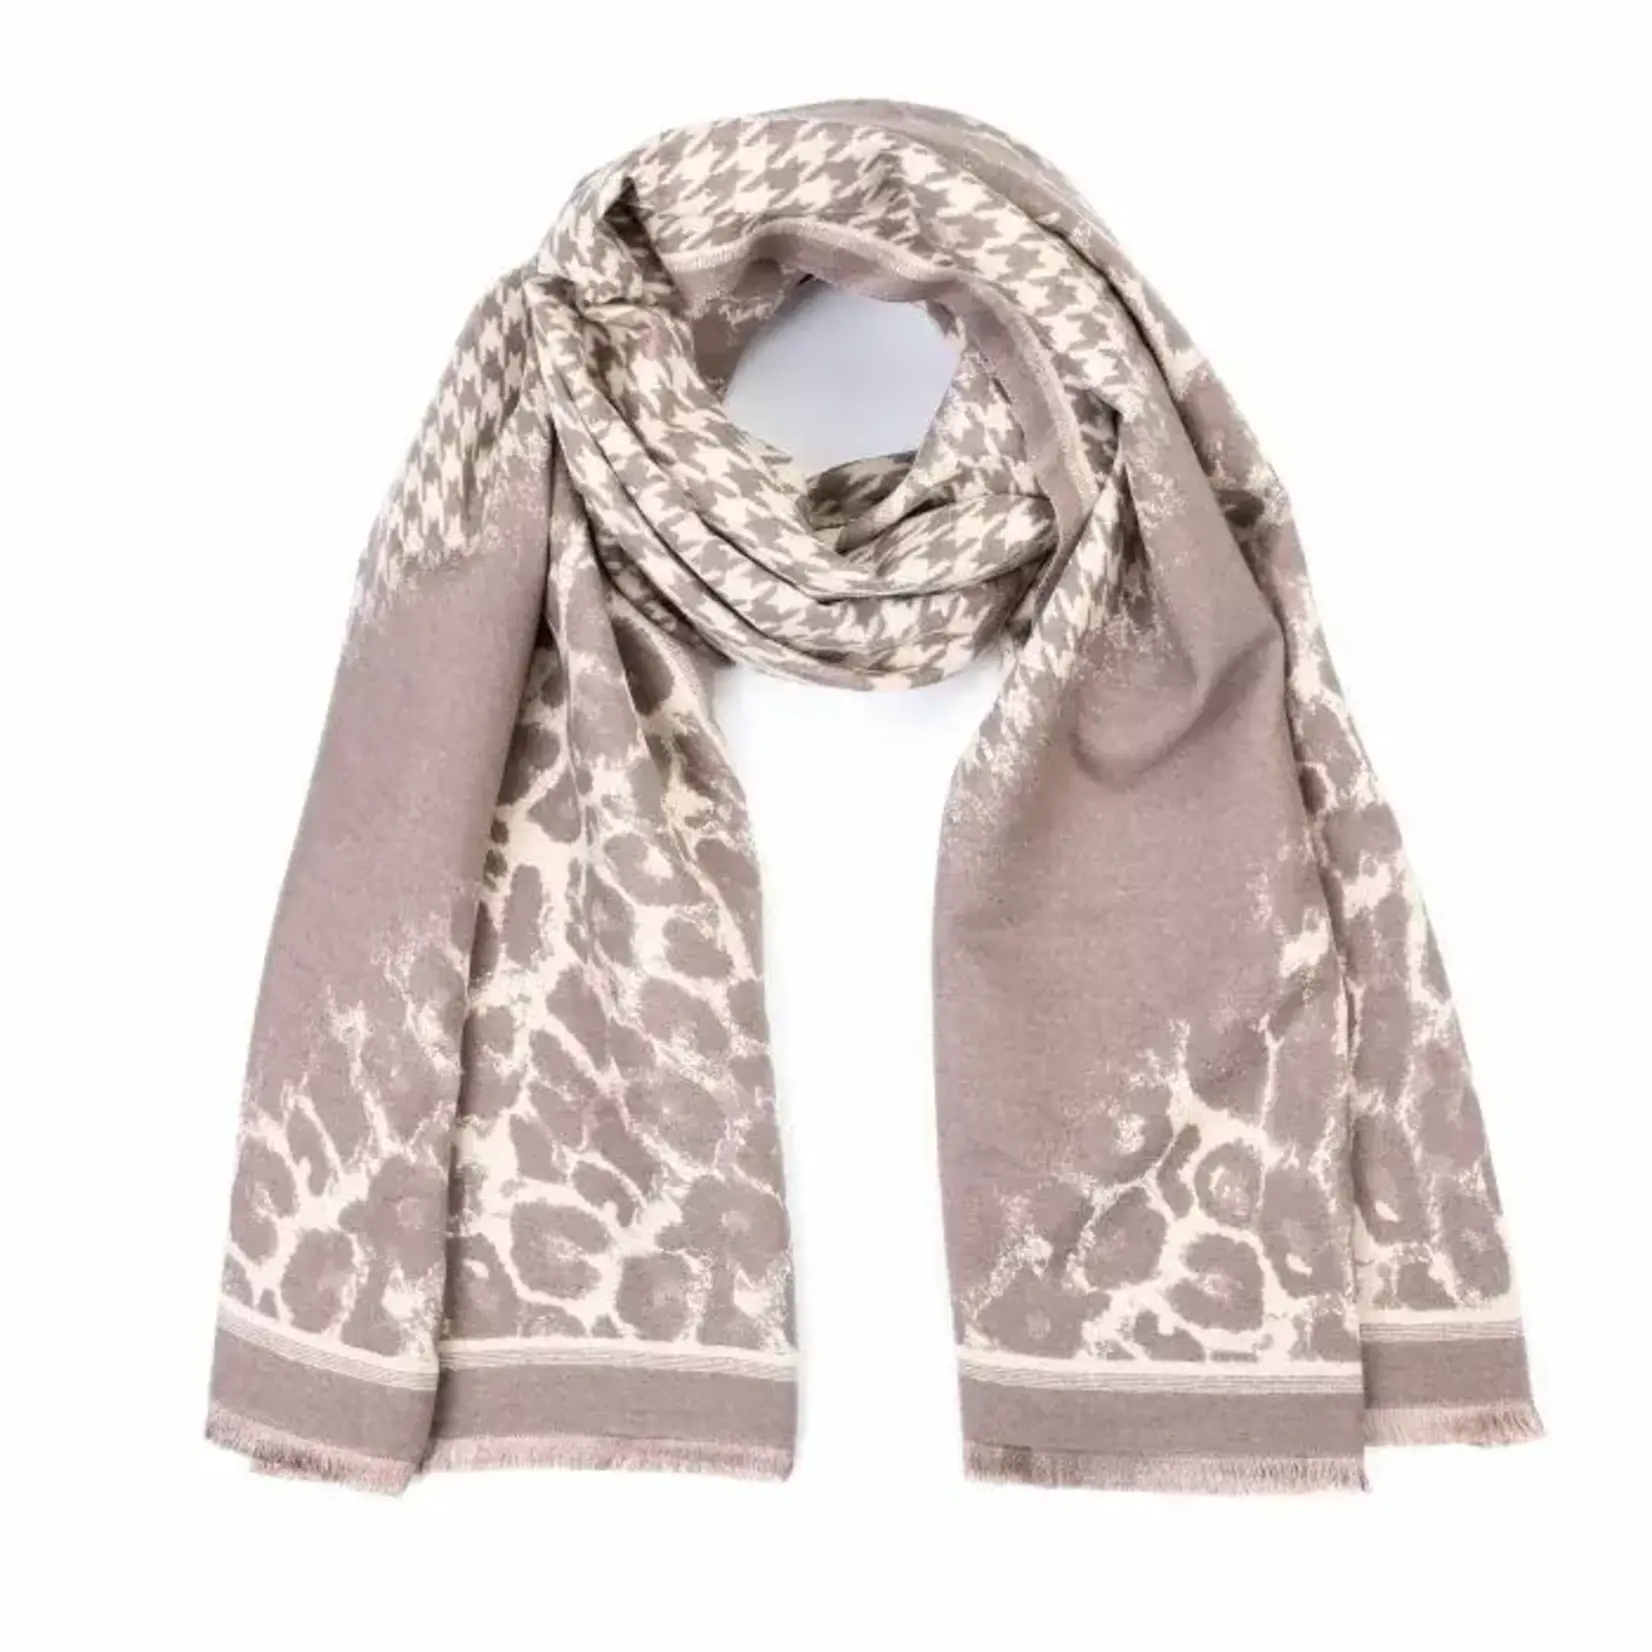 More the Firm Sjaal luxe animal print